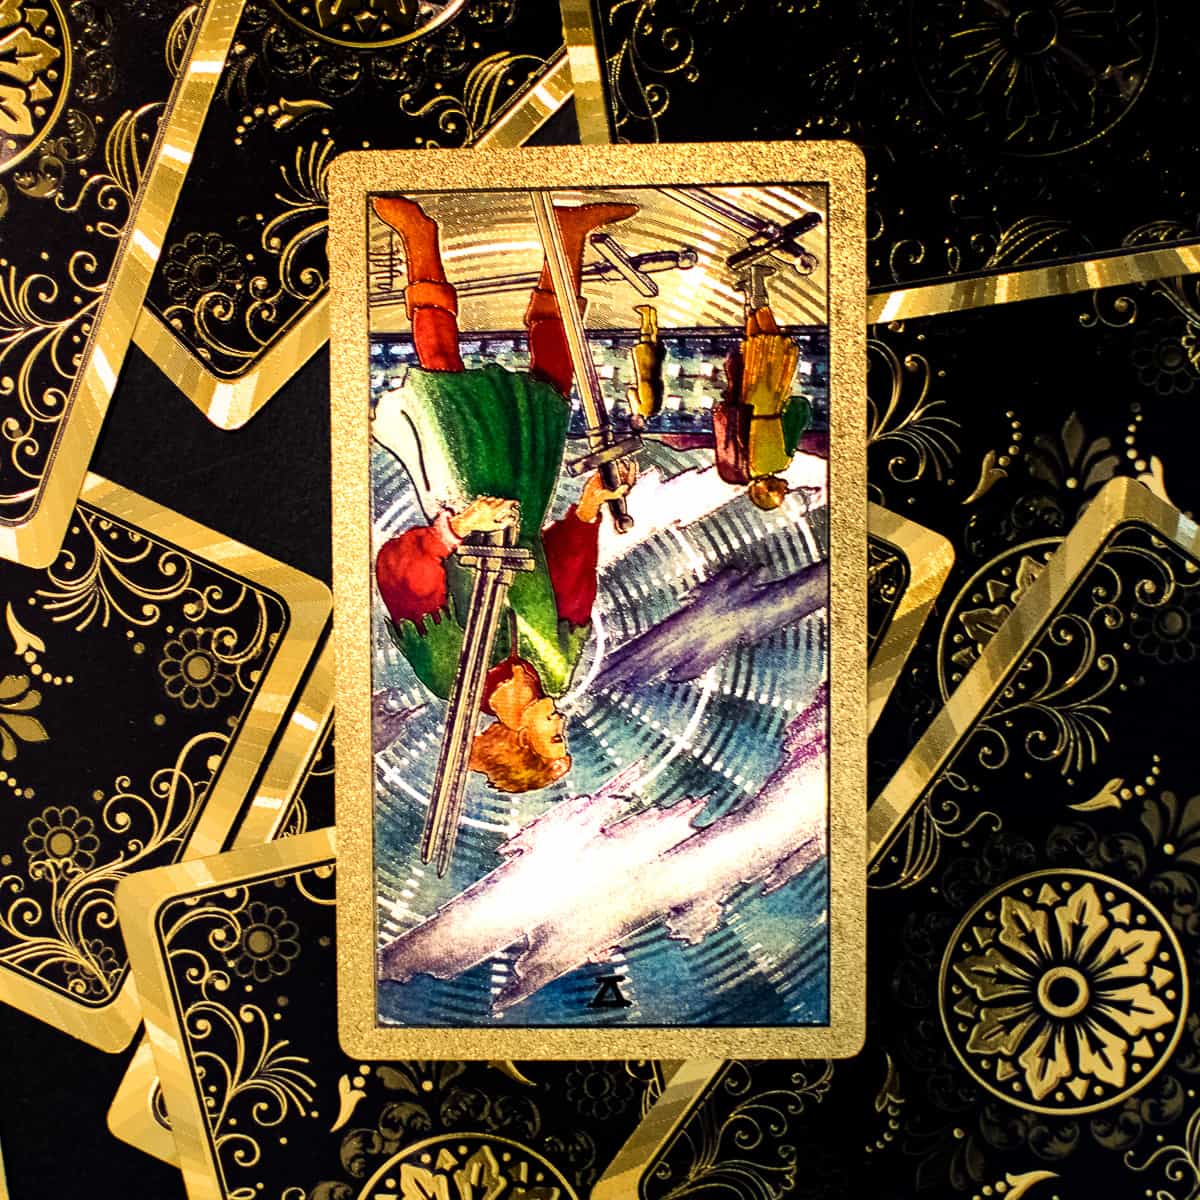 Five of Swords tarot card in the reverse position depicting a man stealing 3 swords and leaving 2 behind with his opponents.